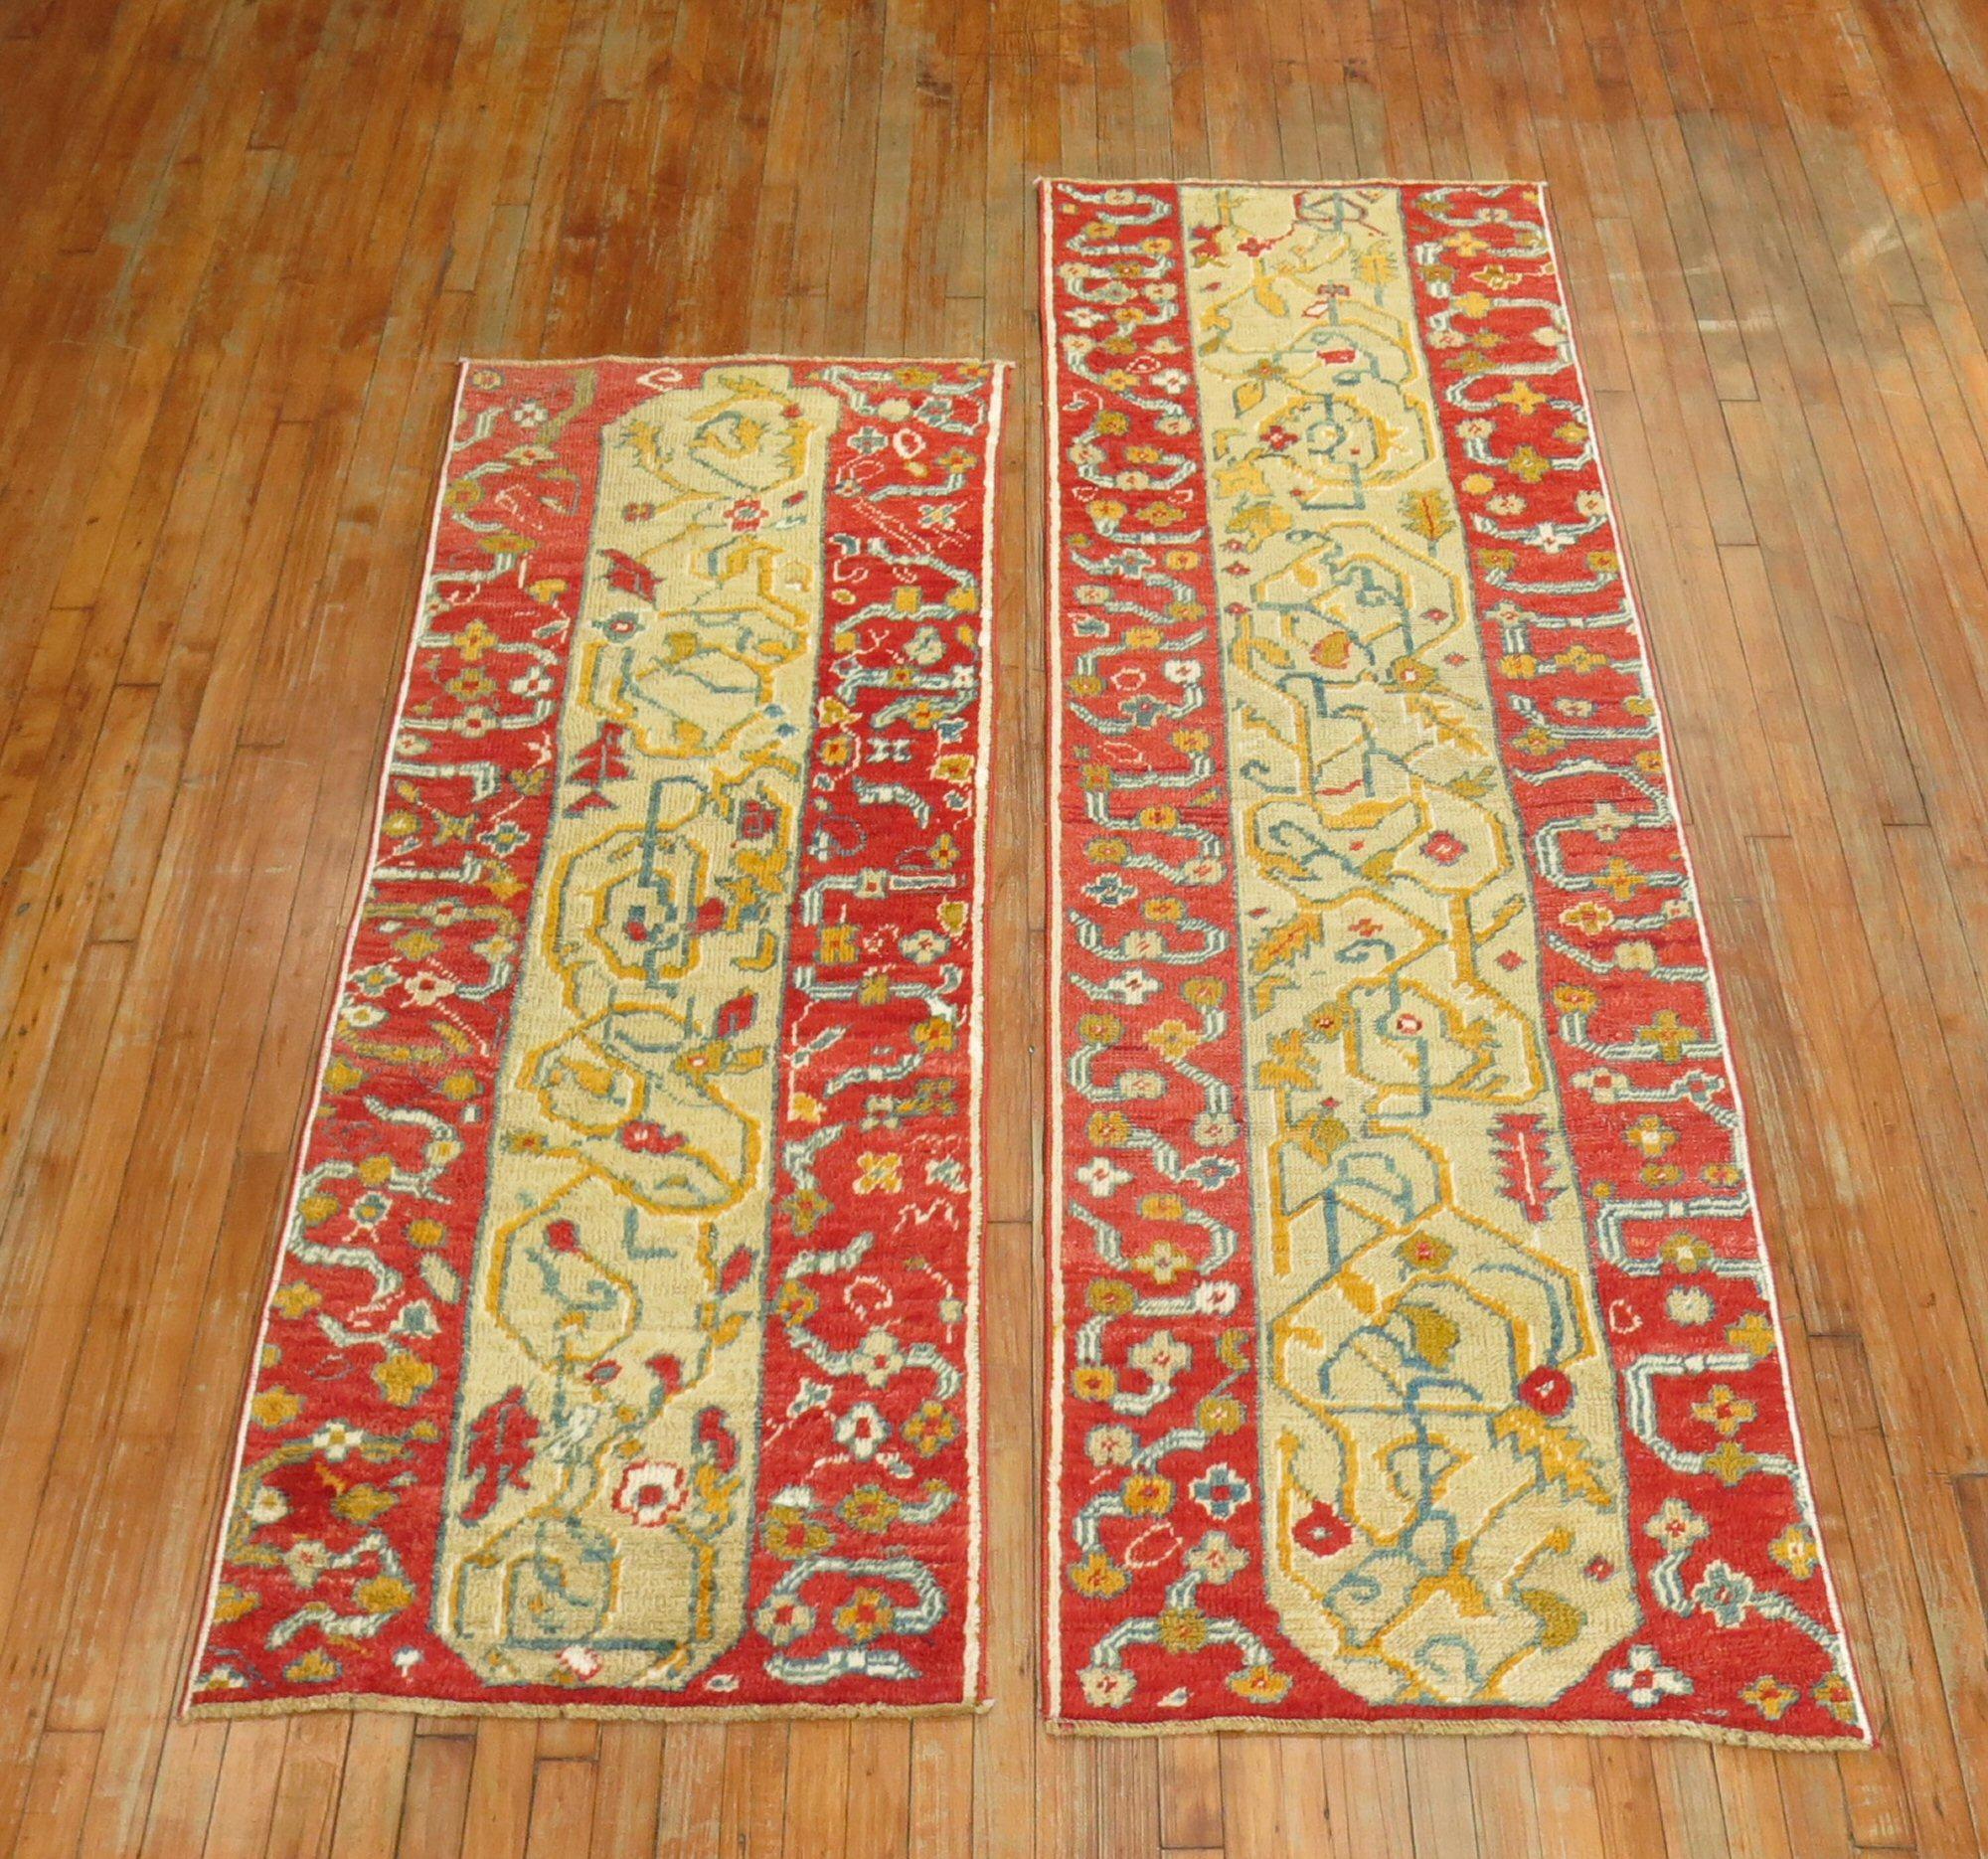 An elaborate pair of early 20th century Turkish Oushak runners with a camel field coral red border

Measuring: 2'6